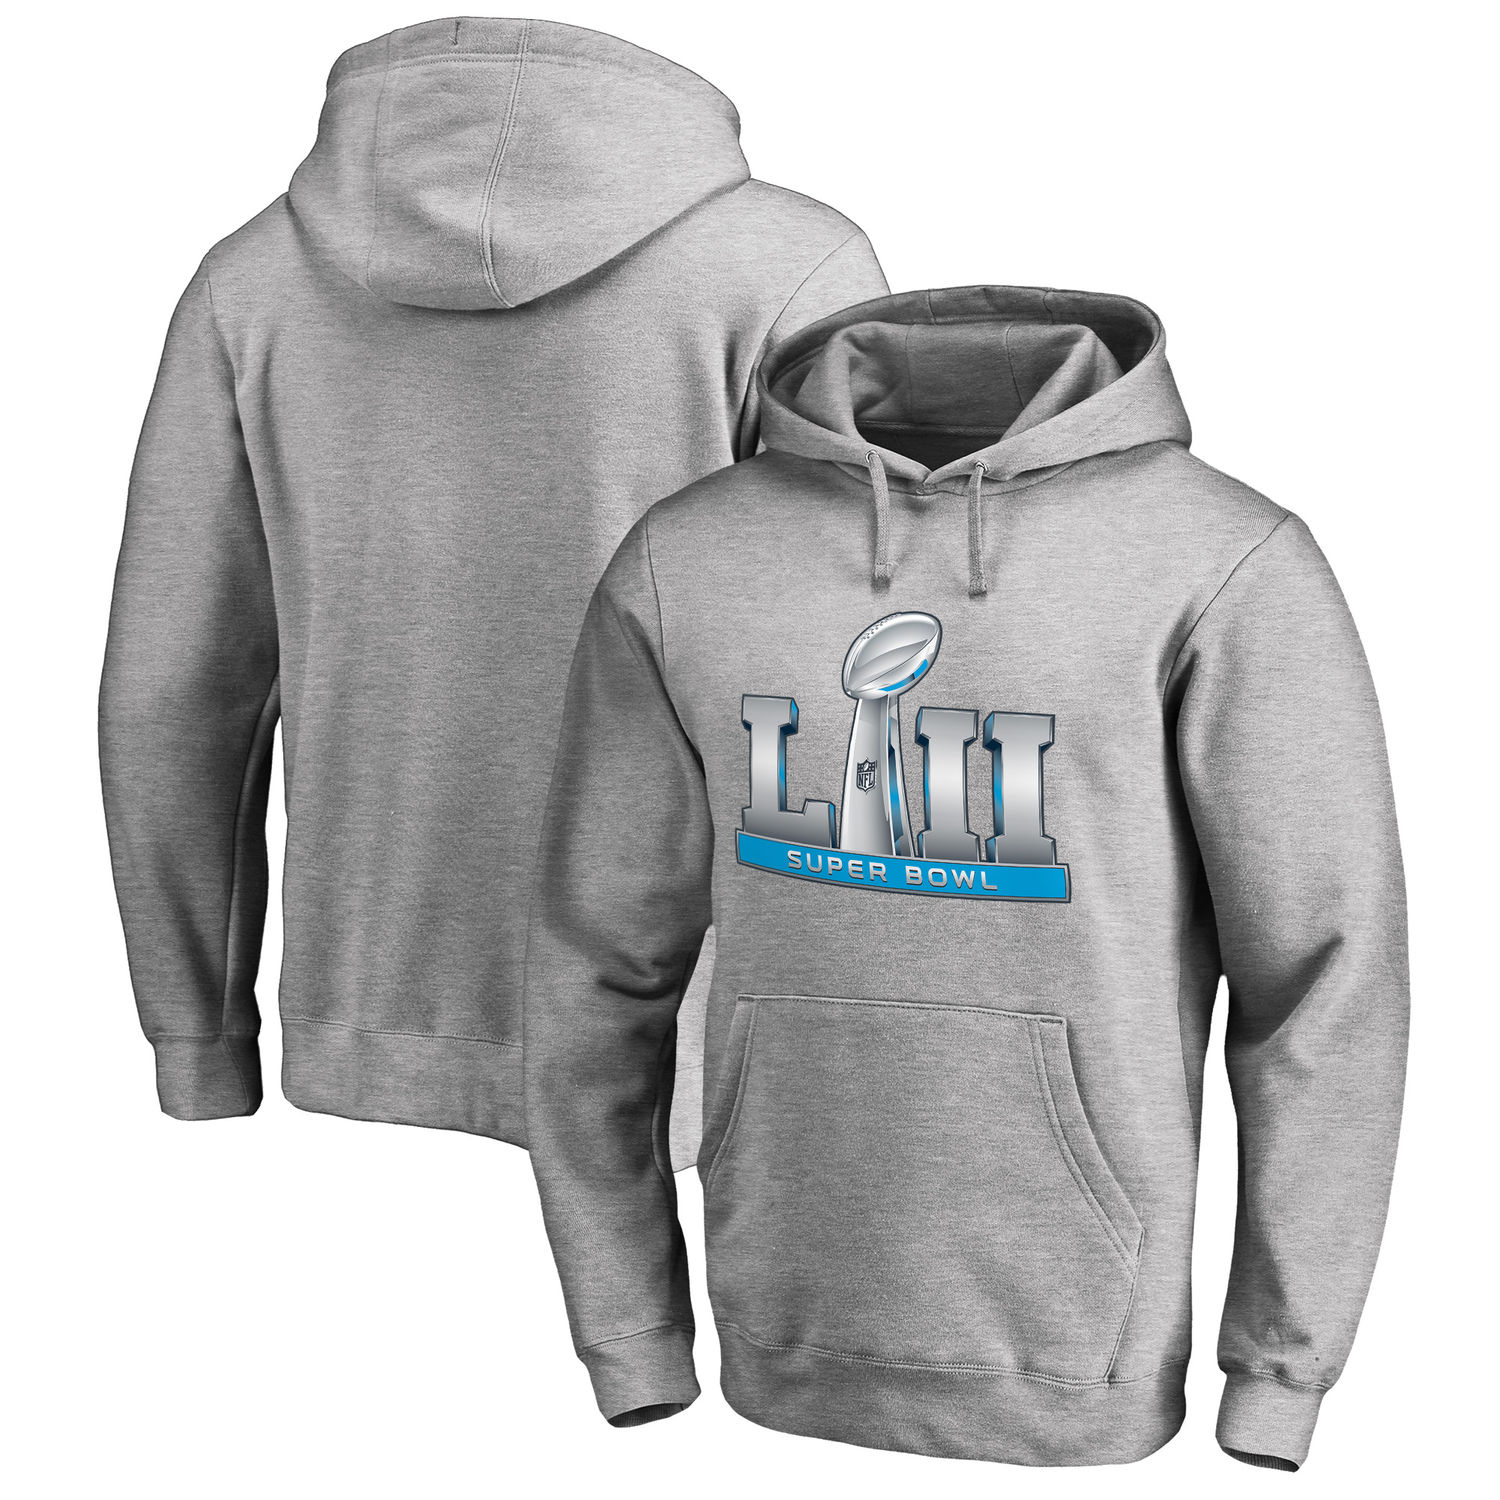 Men's NFL Pro Line by Fanatics Branded Heathered Gray Super Bowl LII Event Pullover Hoodie